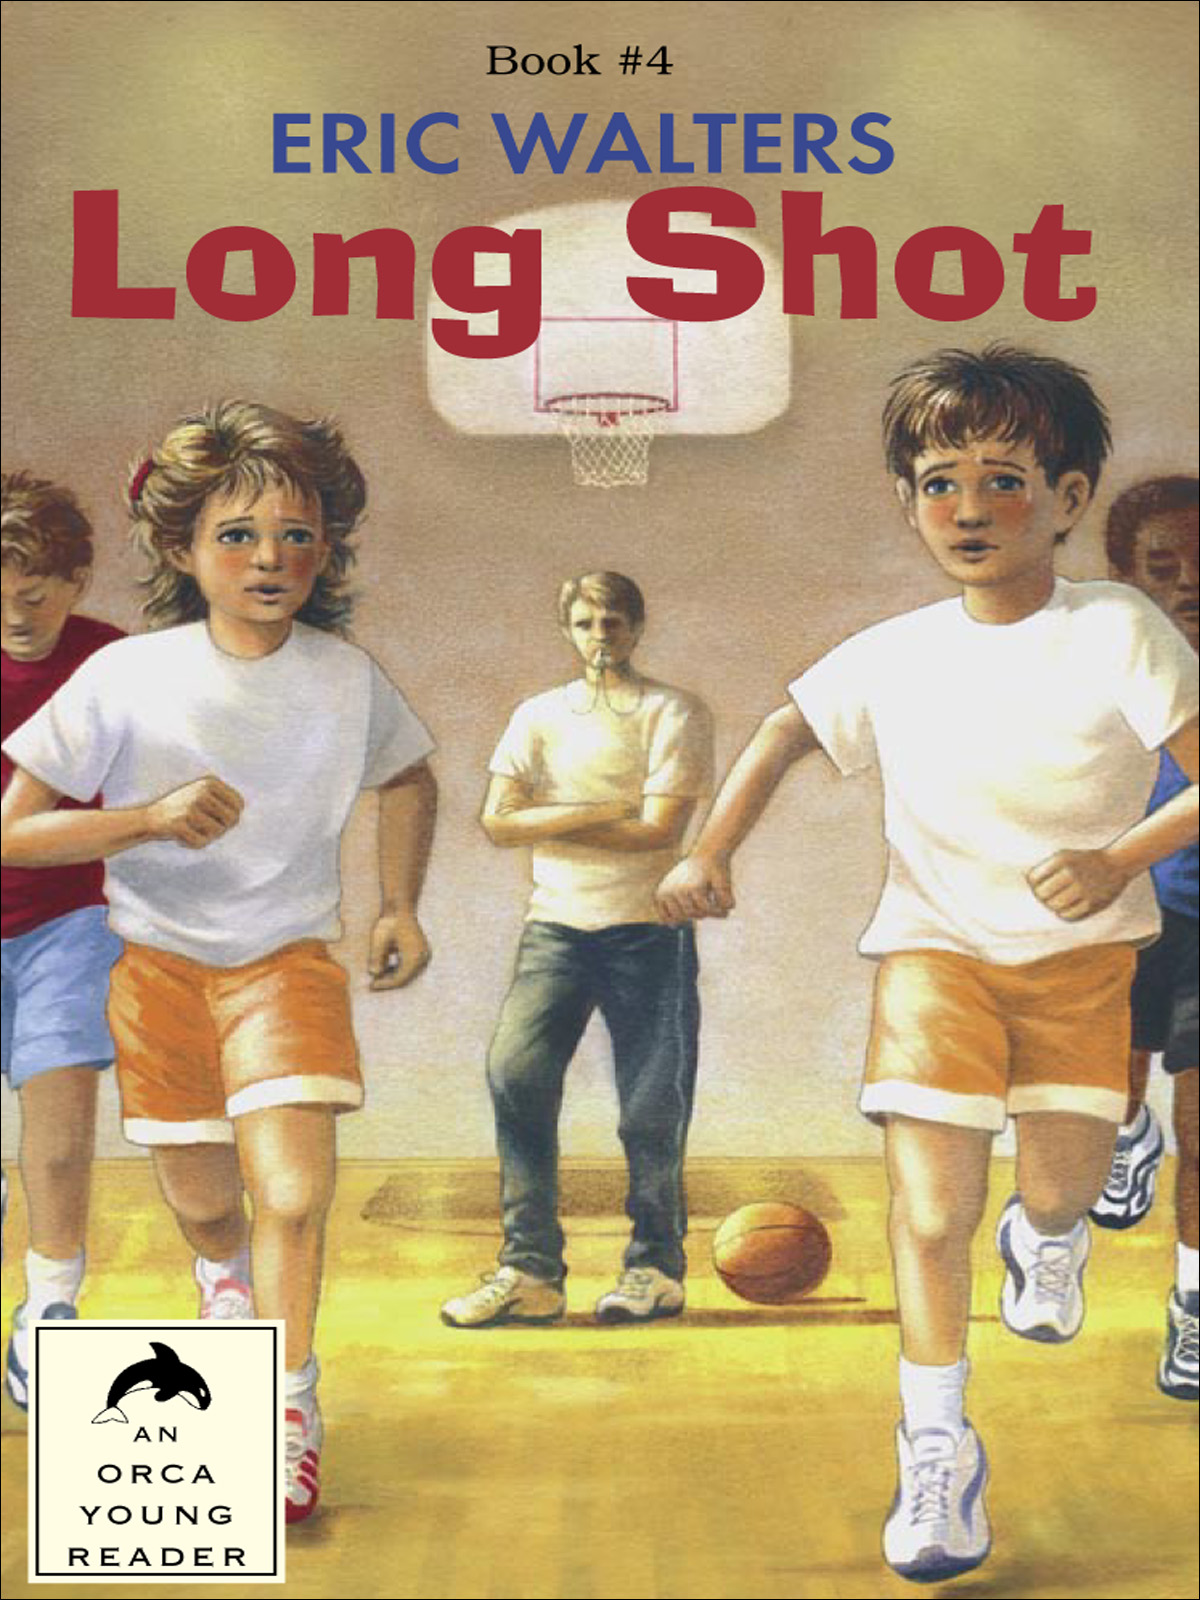 Long Shot (2002) by Eric Walters